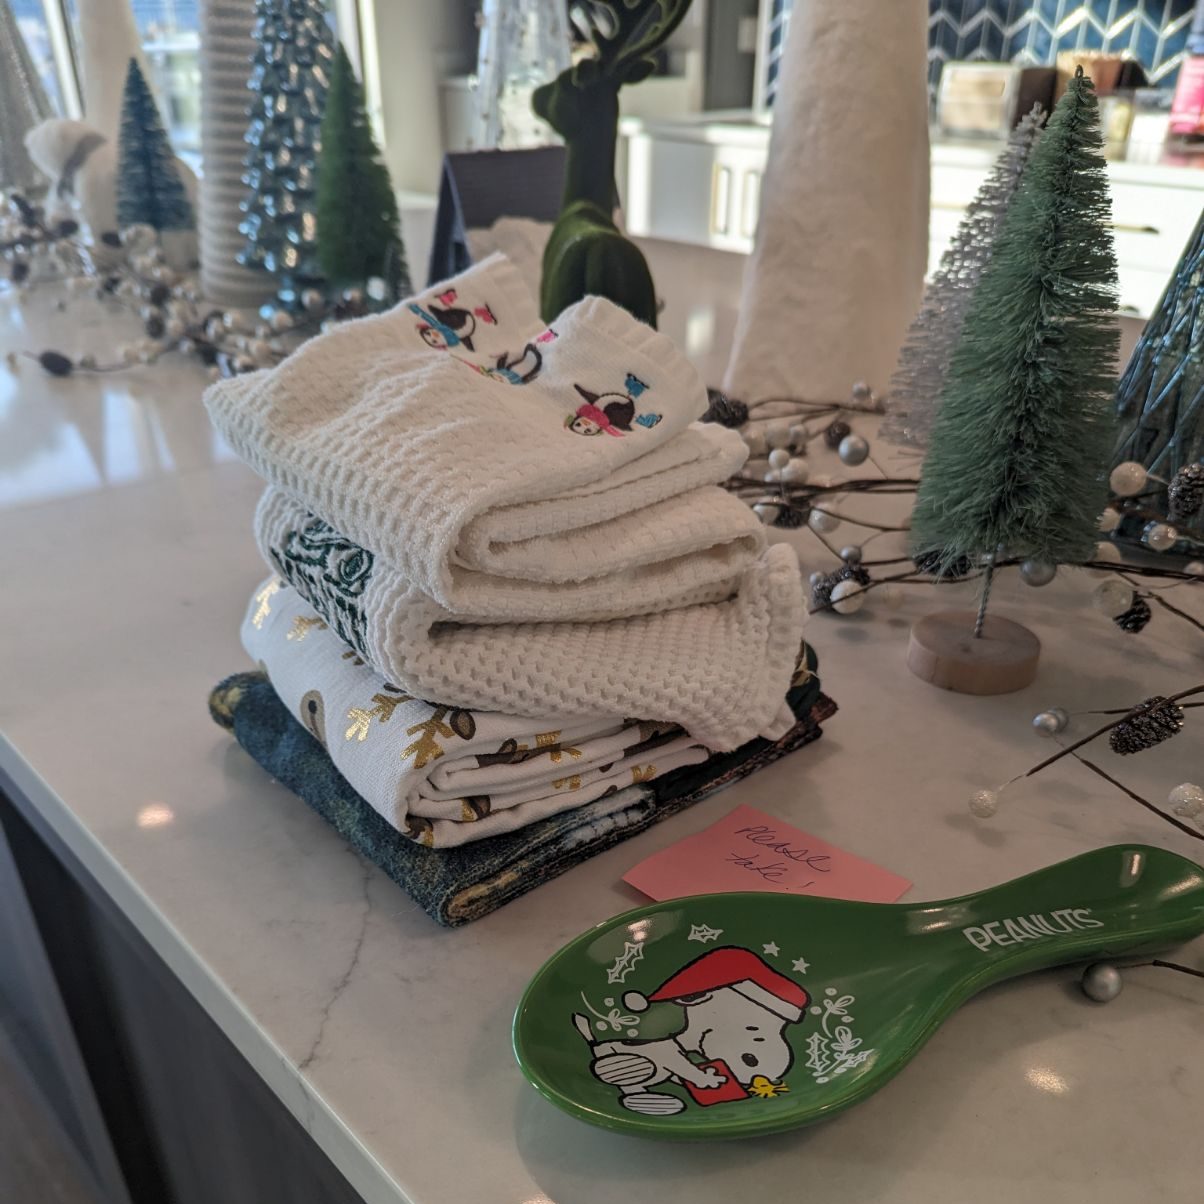 christmas trees, holiday towels, a spoon rest with Snoopy in a santa hat and other decorations on a white counter top